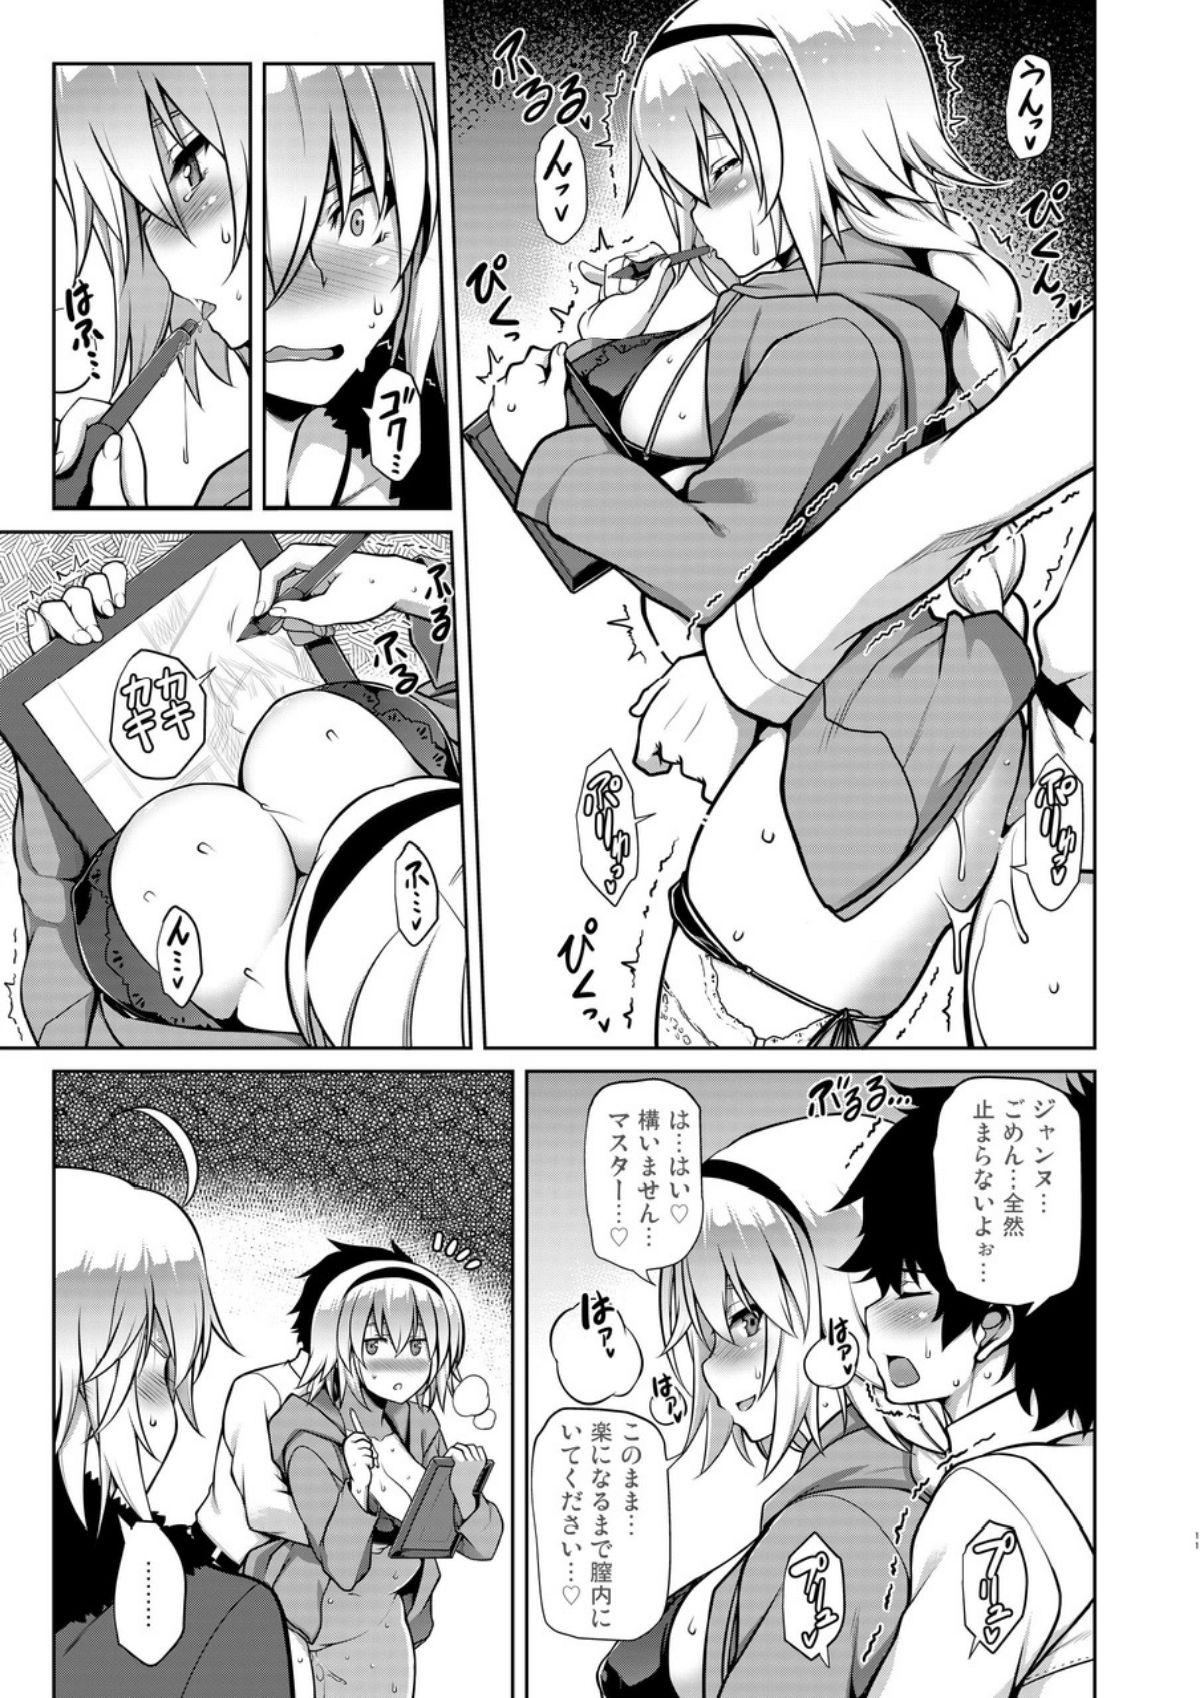 Phat Itezora no Summer Lady - Fate grand order Raw - Page 10